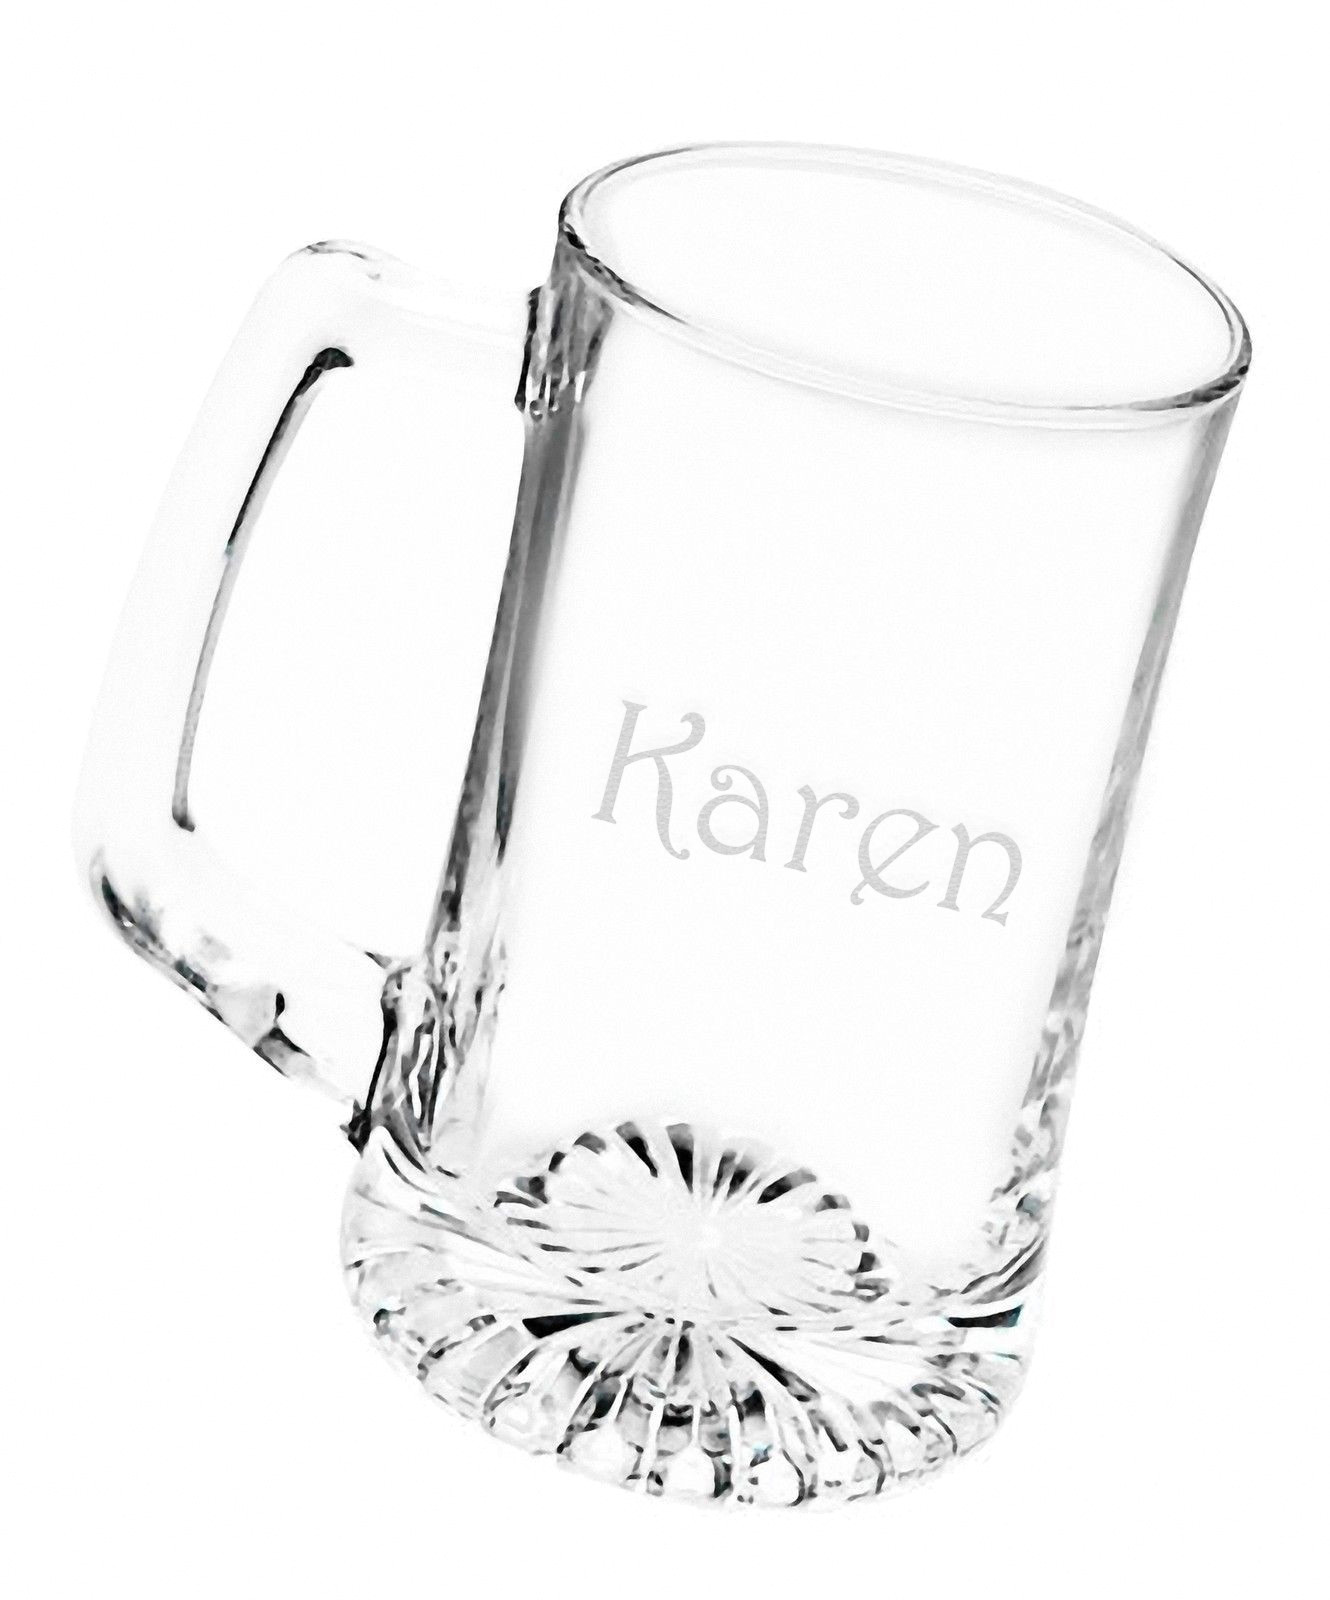 Bride and Groom Beer Mugs, Personalized Beer Glasses, Gifts for the Couple,  Engraved Wedding Glasses, Glass Beer Mug With Handle Set of 2 